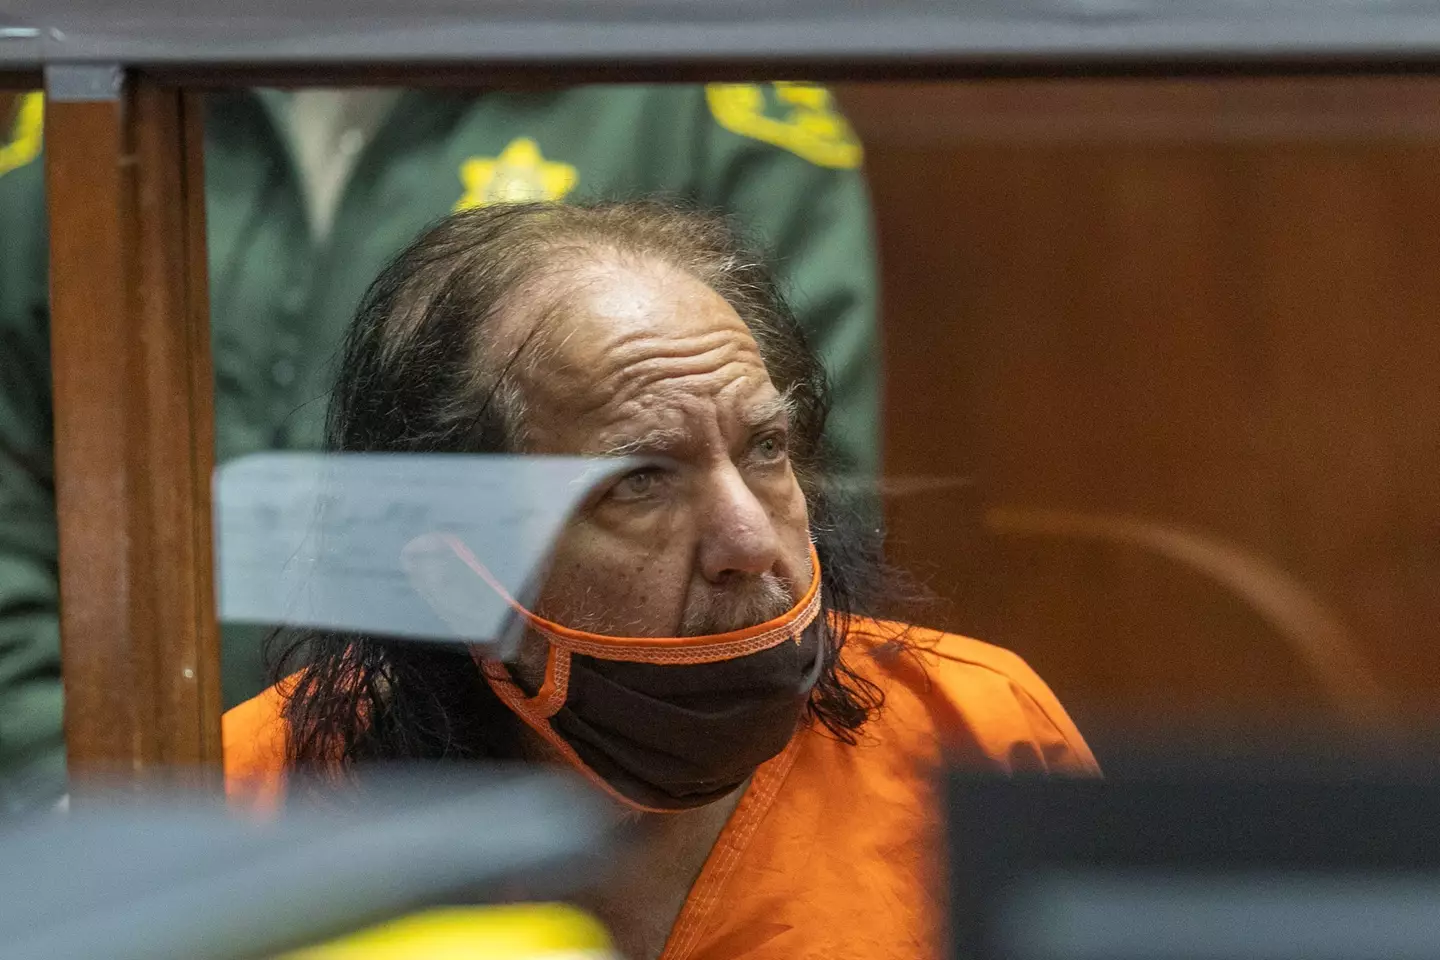 Ron Jeremy was found to be incompetent to stand trial.